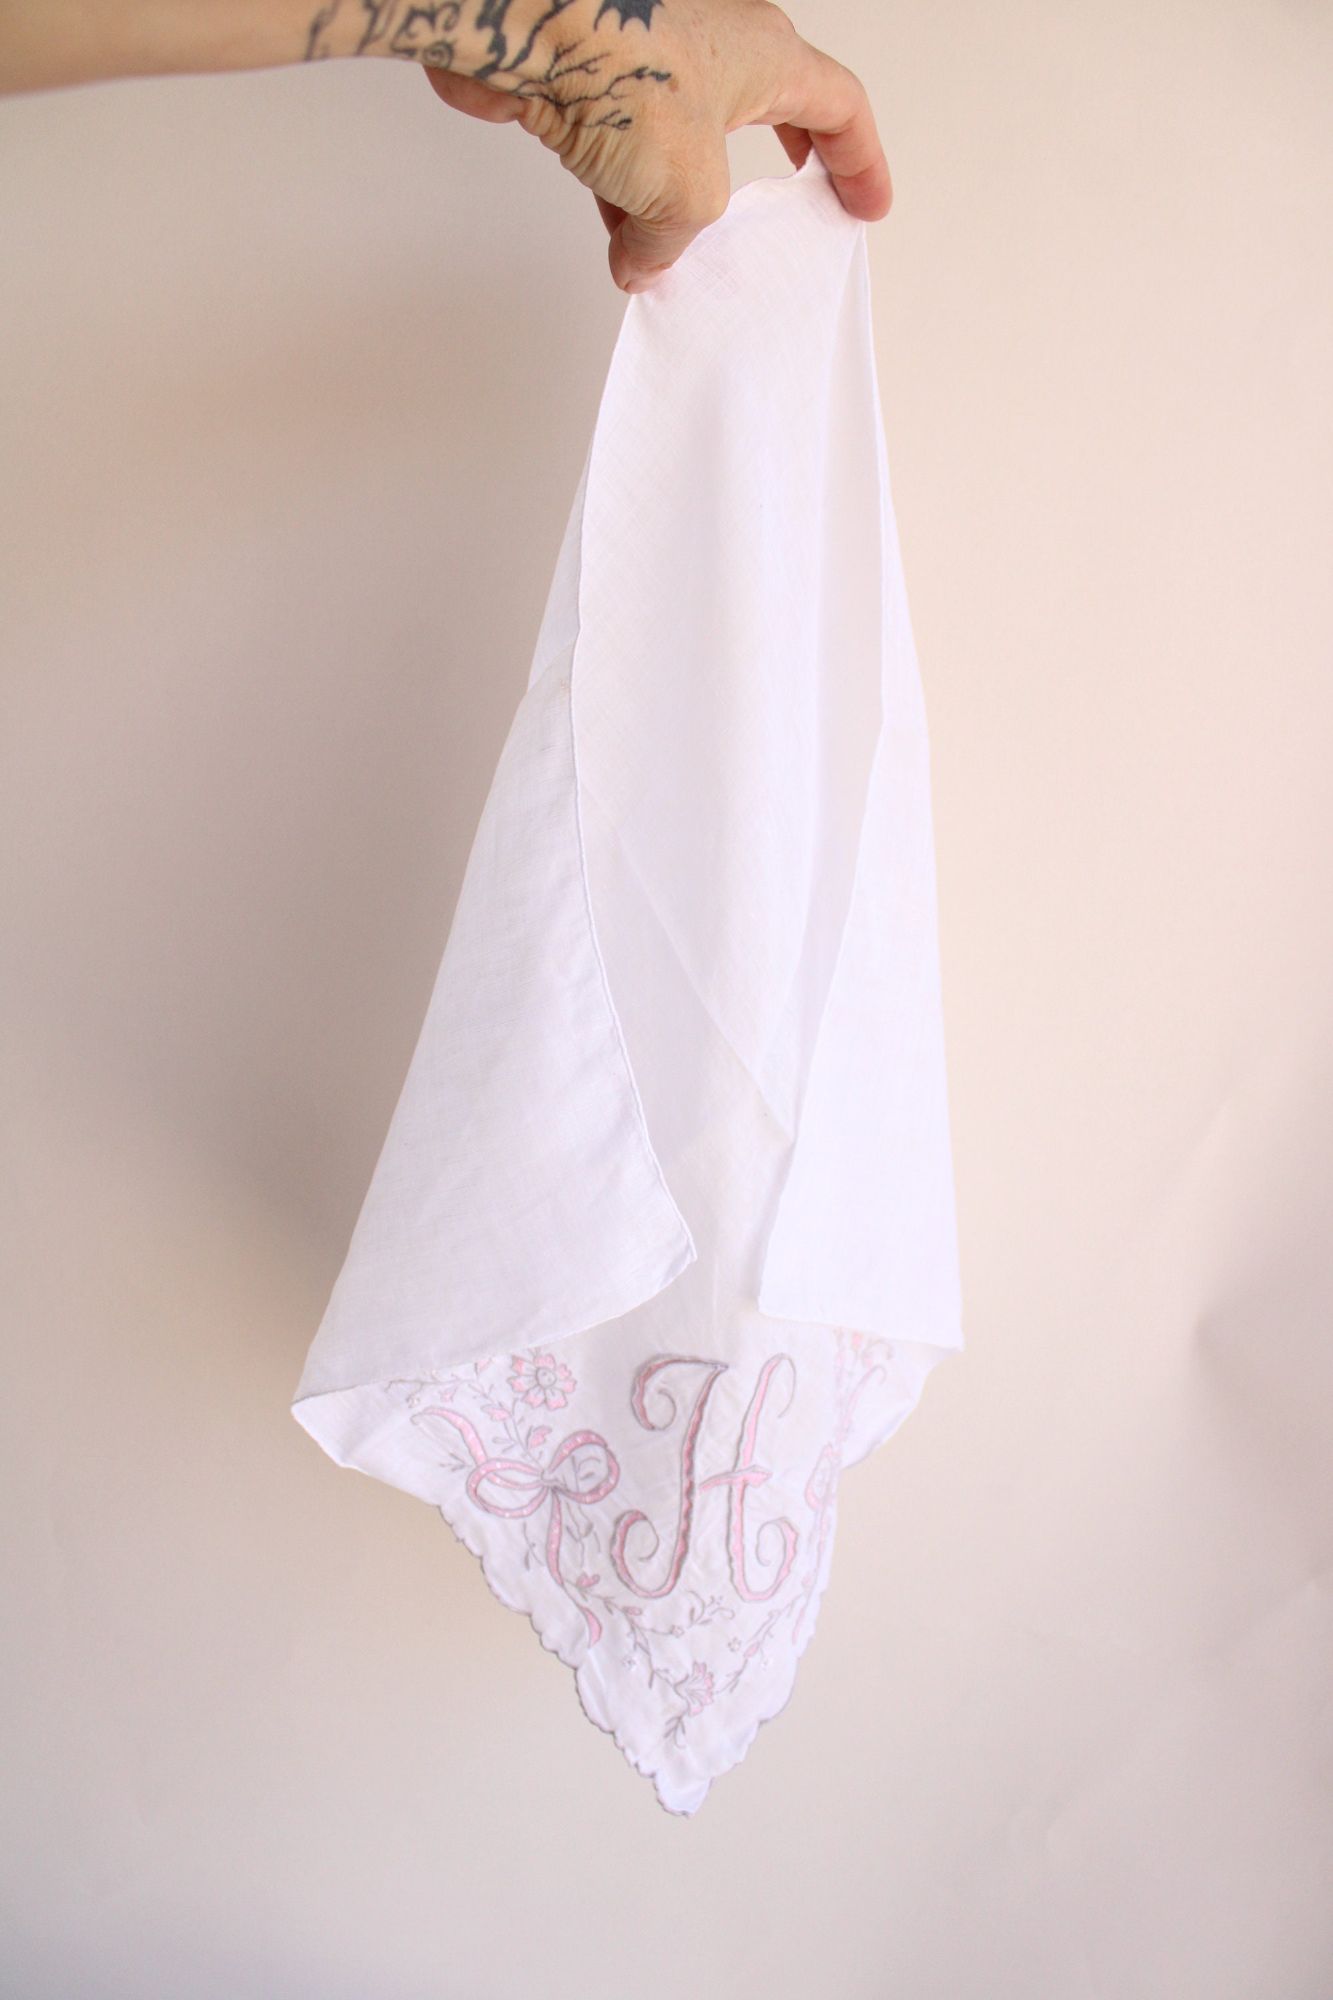 Vintage Monogrammed Initial H Pink Embroidered Linen Hanky